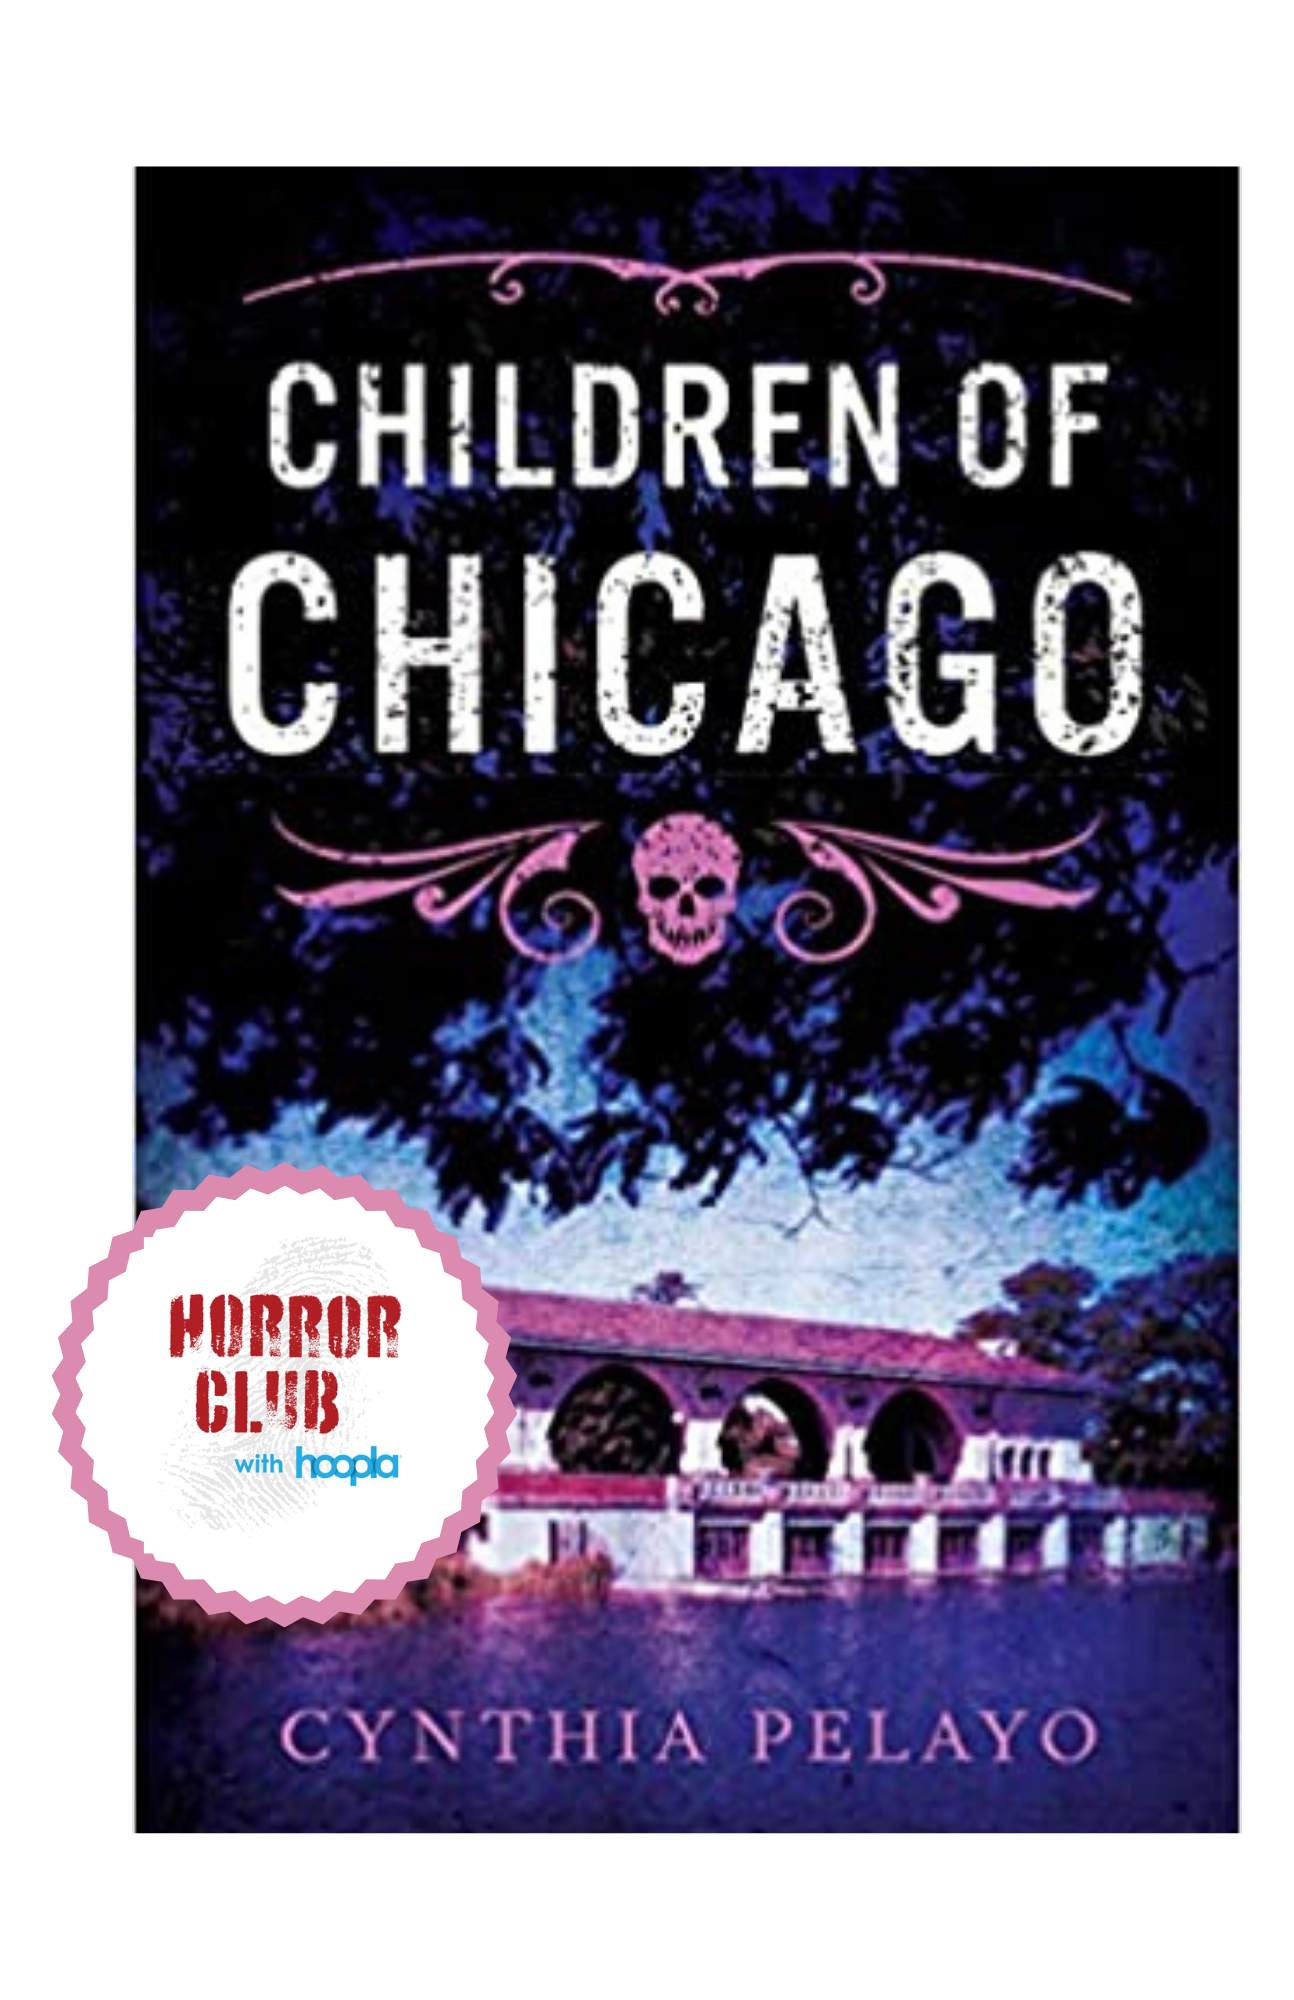 Boat house on a river with blue and purple tones. Text reads "Children of Chicago" and "Read it now on hoopla".